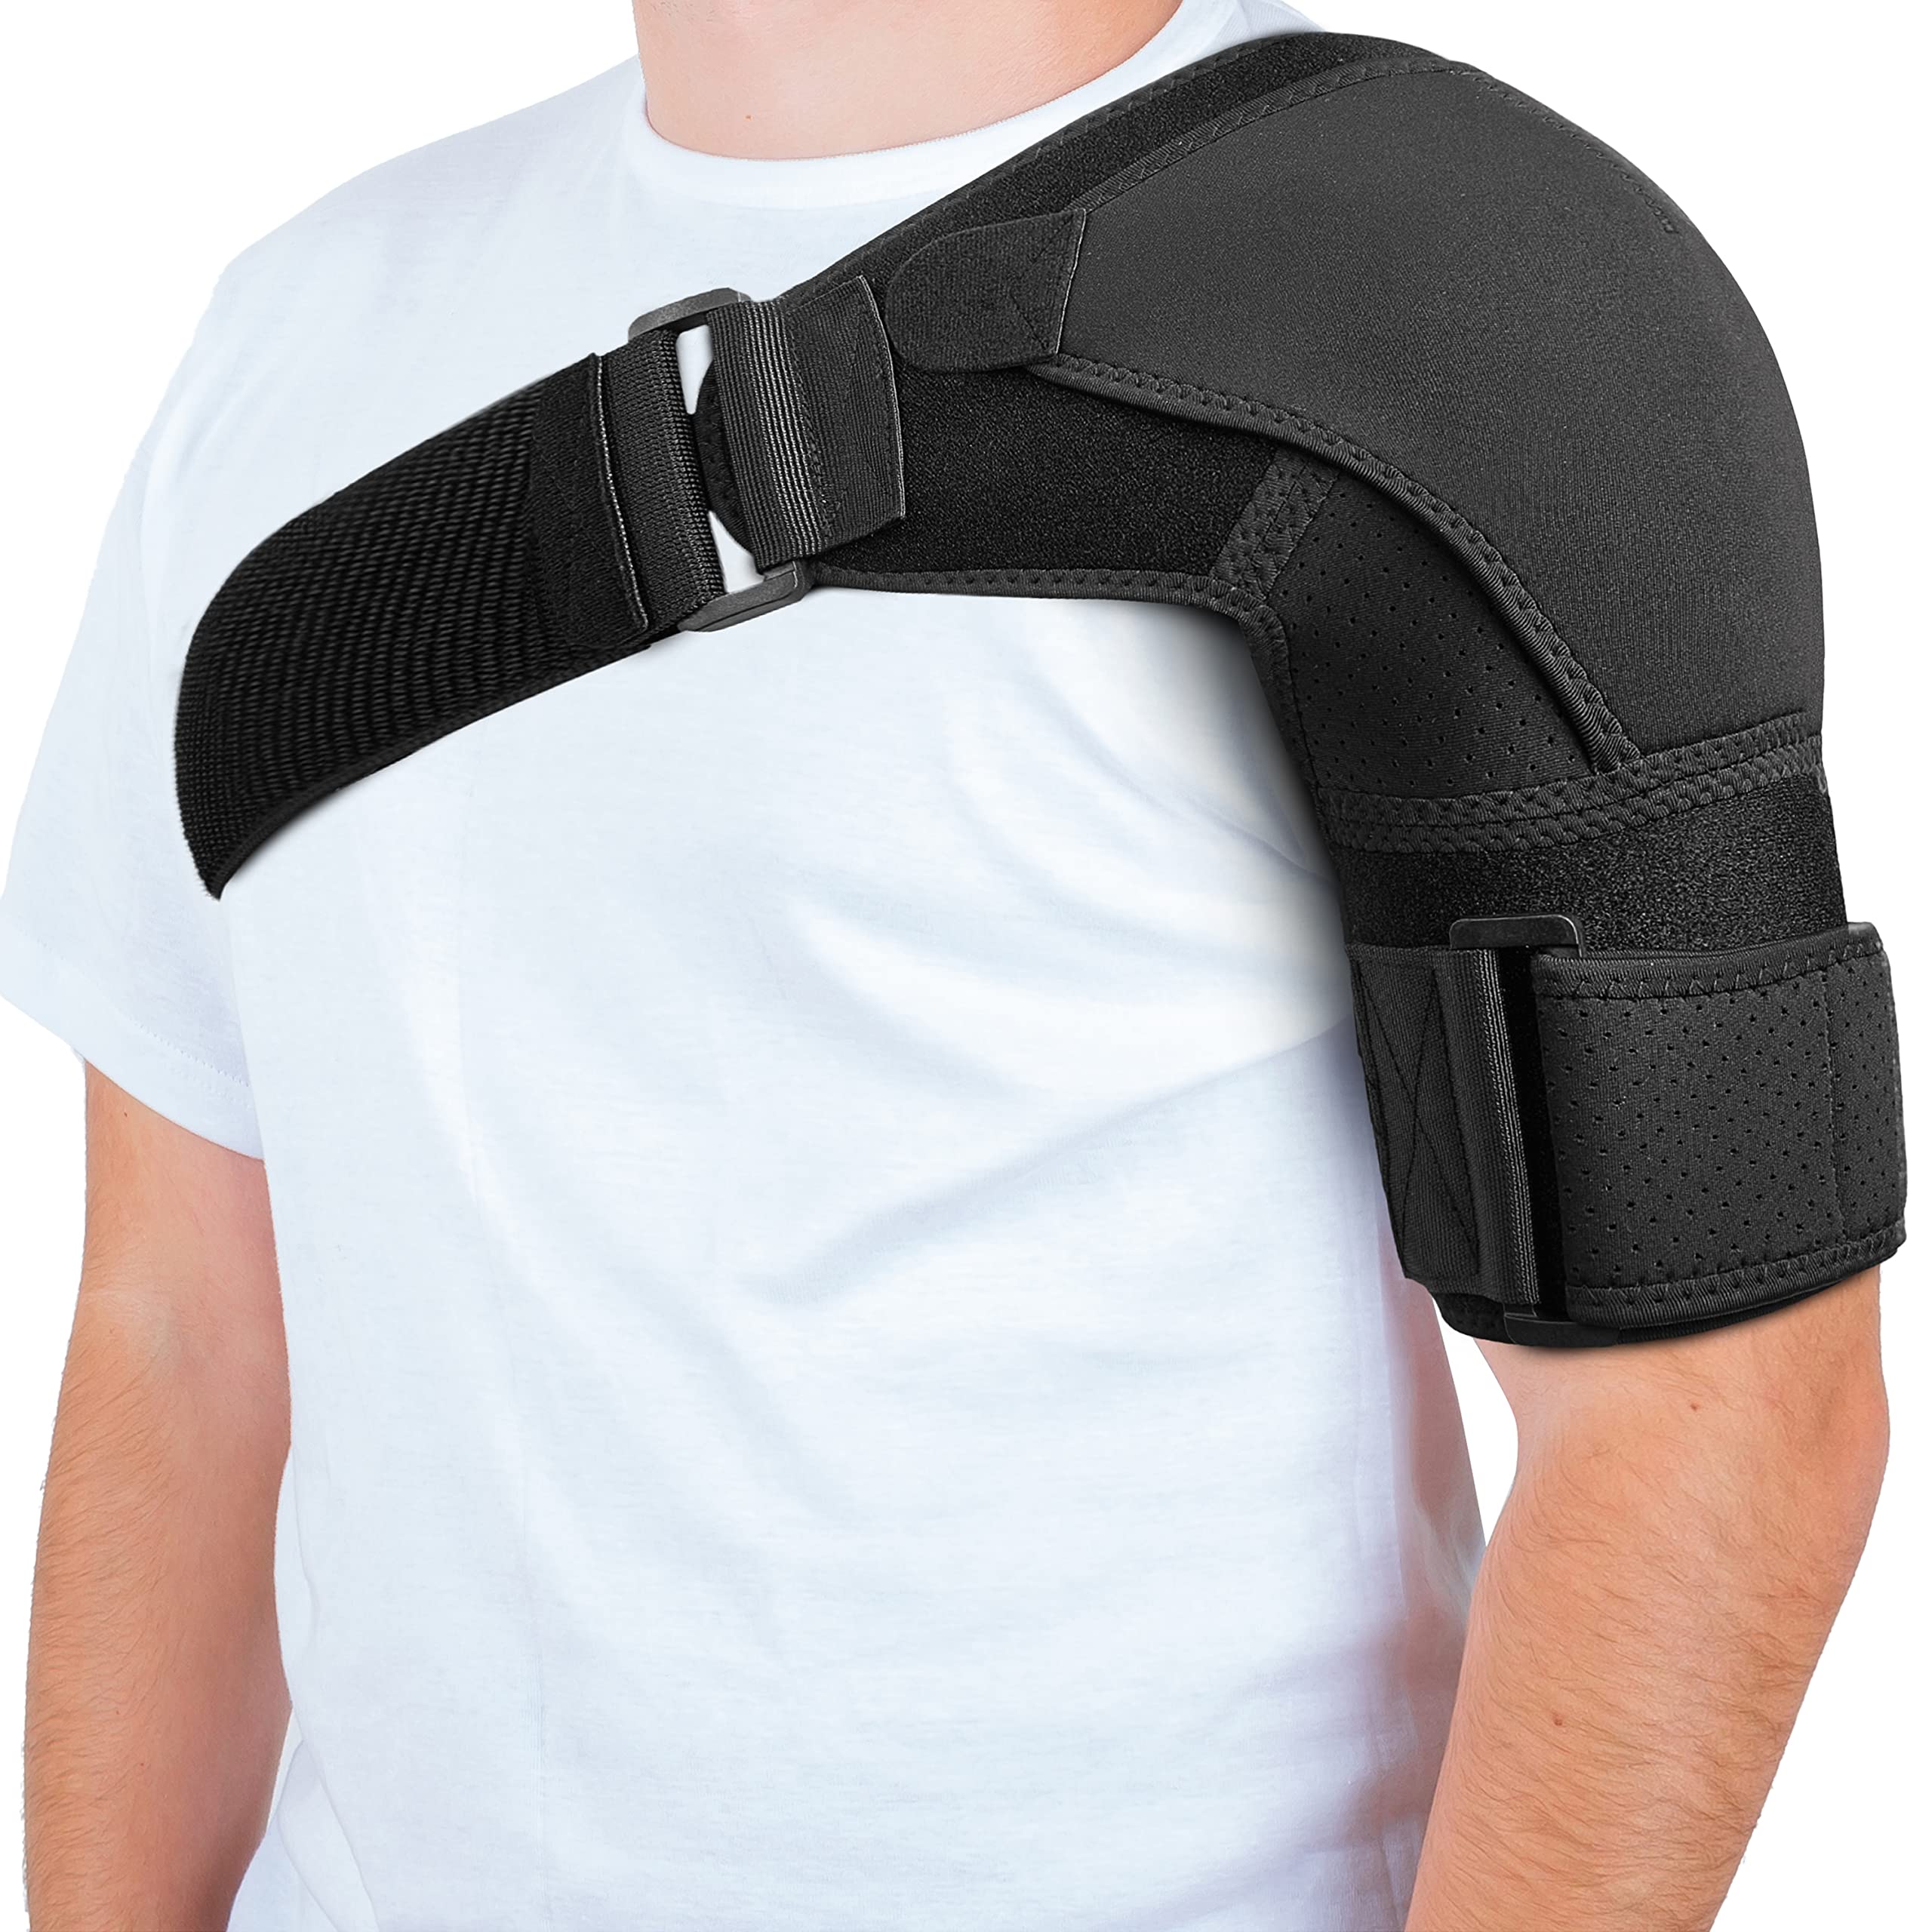 Ueasy Double Shoulder Support Brace Posture Gym Sport Injury Guard armor  Back Pad Cuff Brace for Pain Relief for Arthritis, Arm, Joint Injury,  Dislocated for Men Women Shoulder Protector 